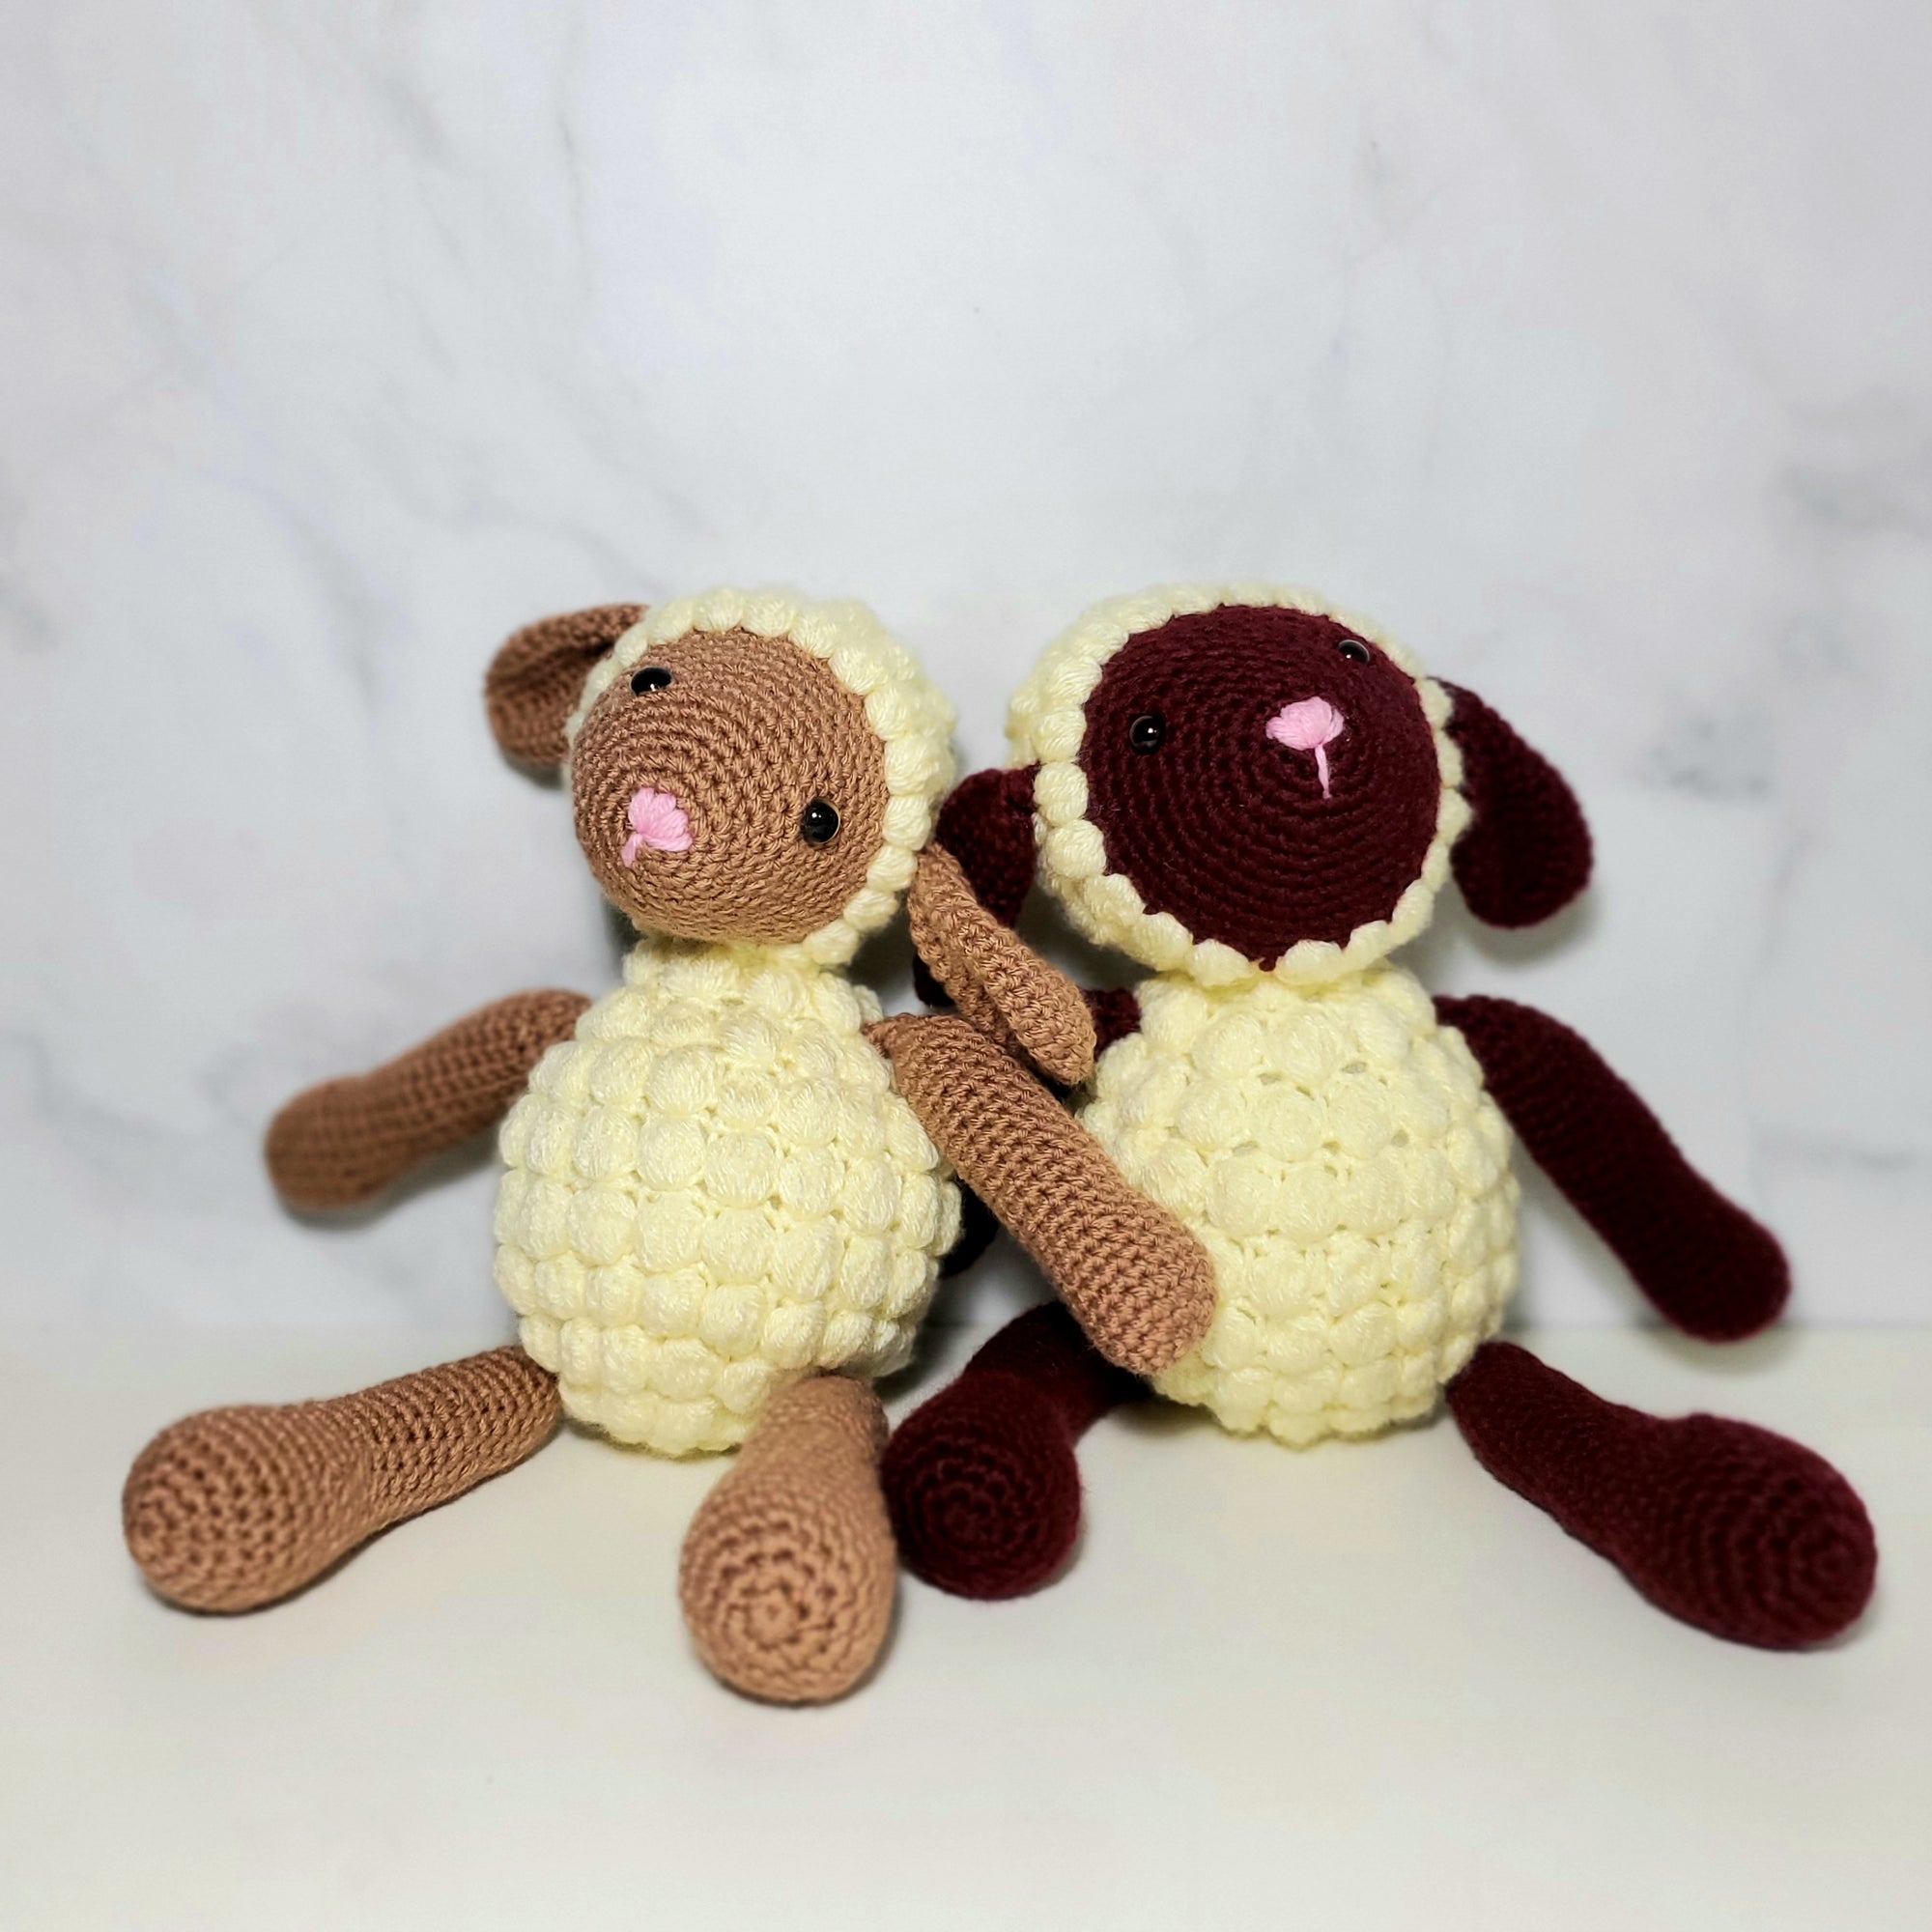 Crochet Character - Wooly Sheep